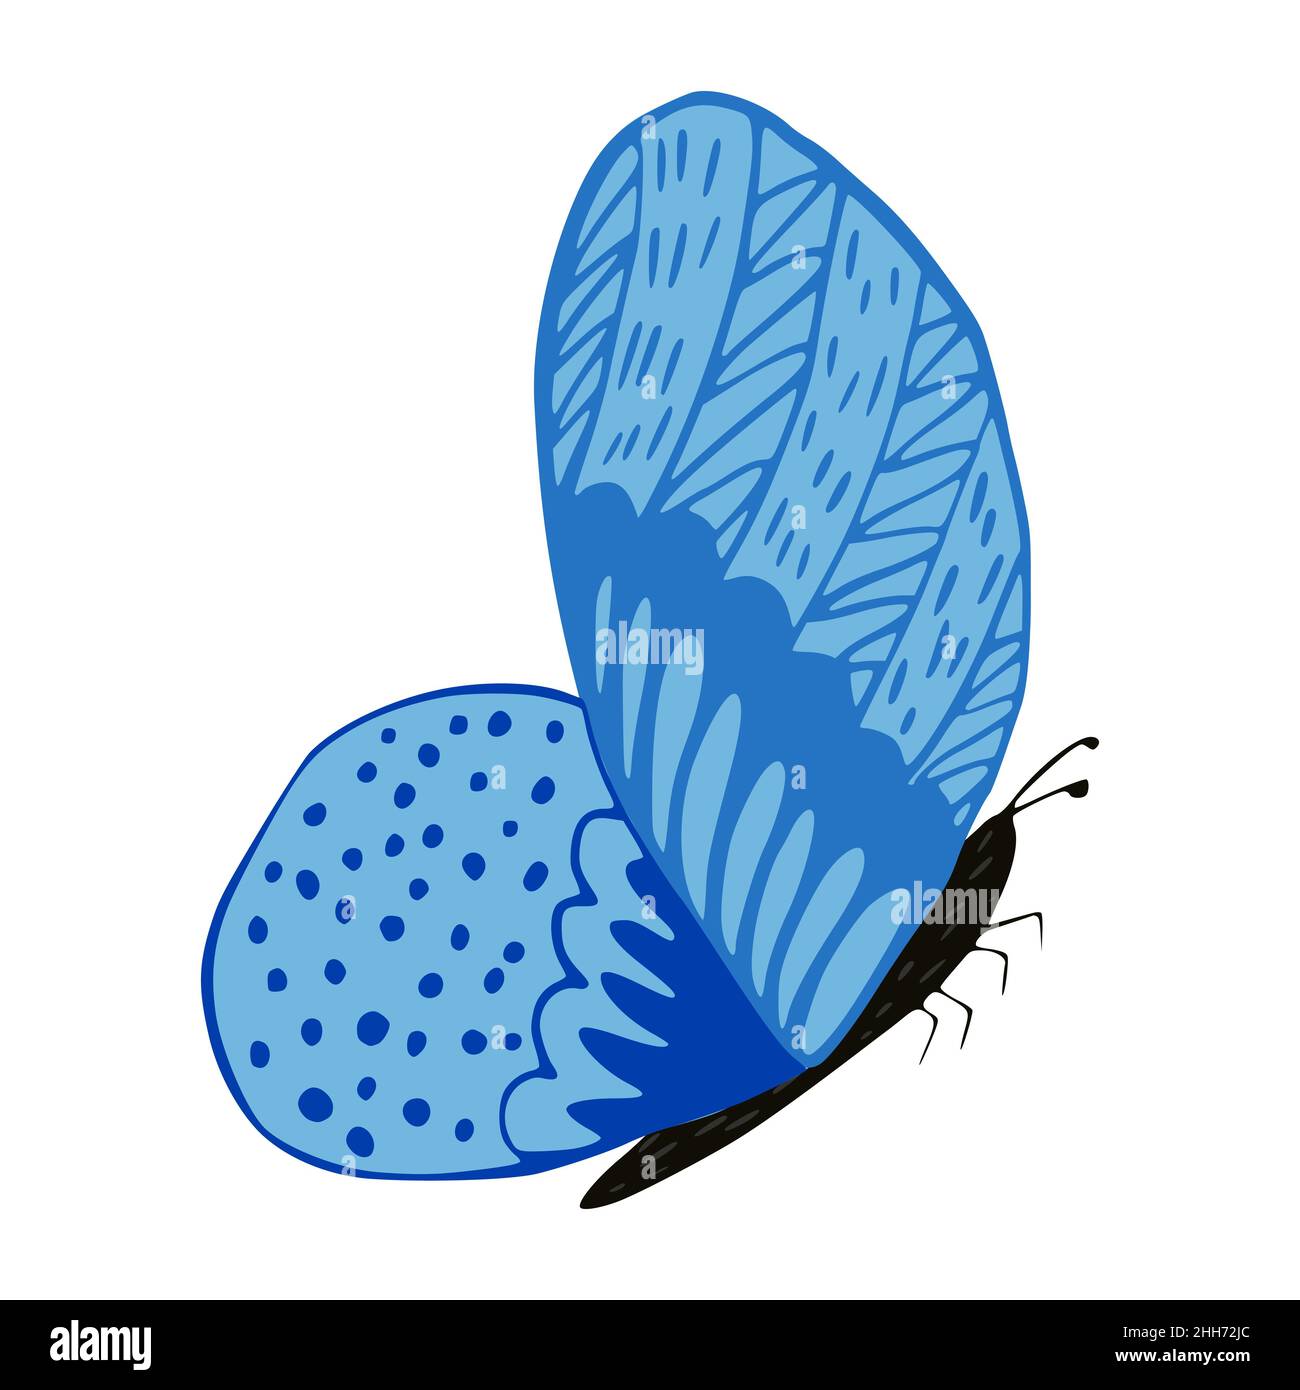 Butterfly isolated on white background. Abstract insect for pollination in black and blue in doodle style vector illustration. Stock Vector